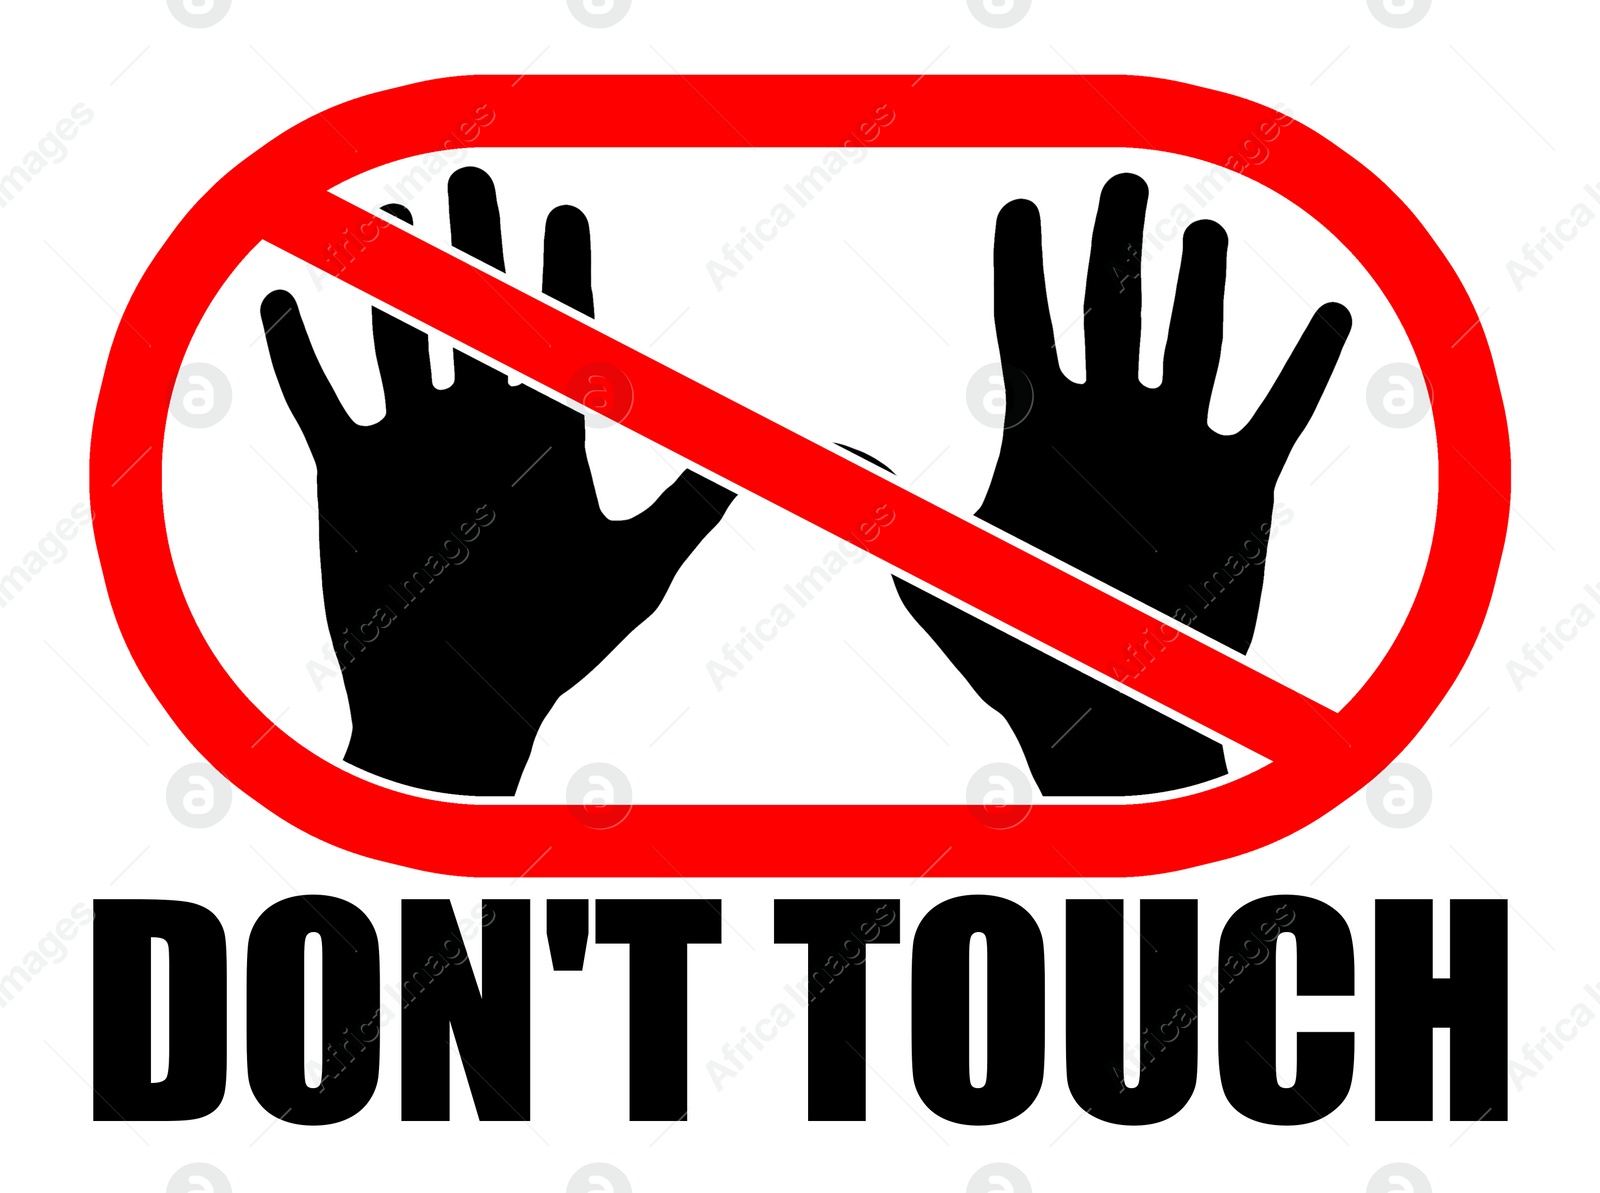 Illustration of Don't Touch!  hands and prohibition sign as important measure during coronavirus outbreak